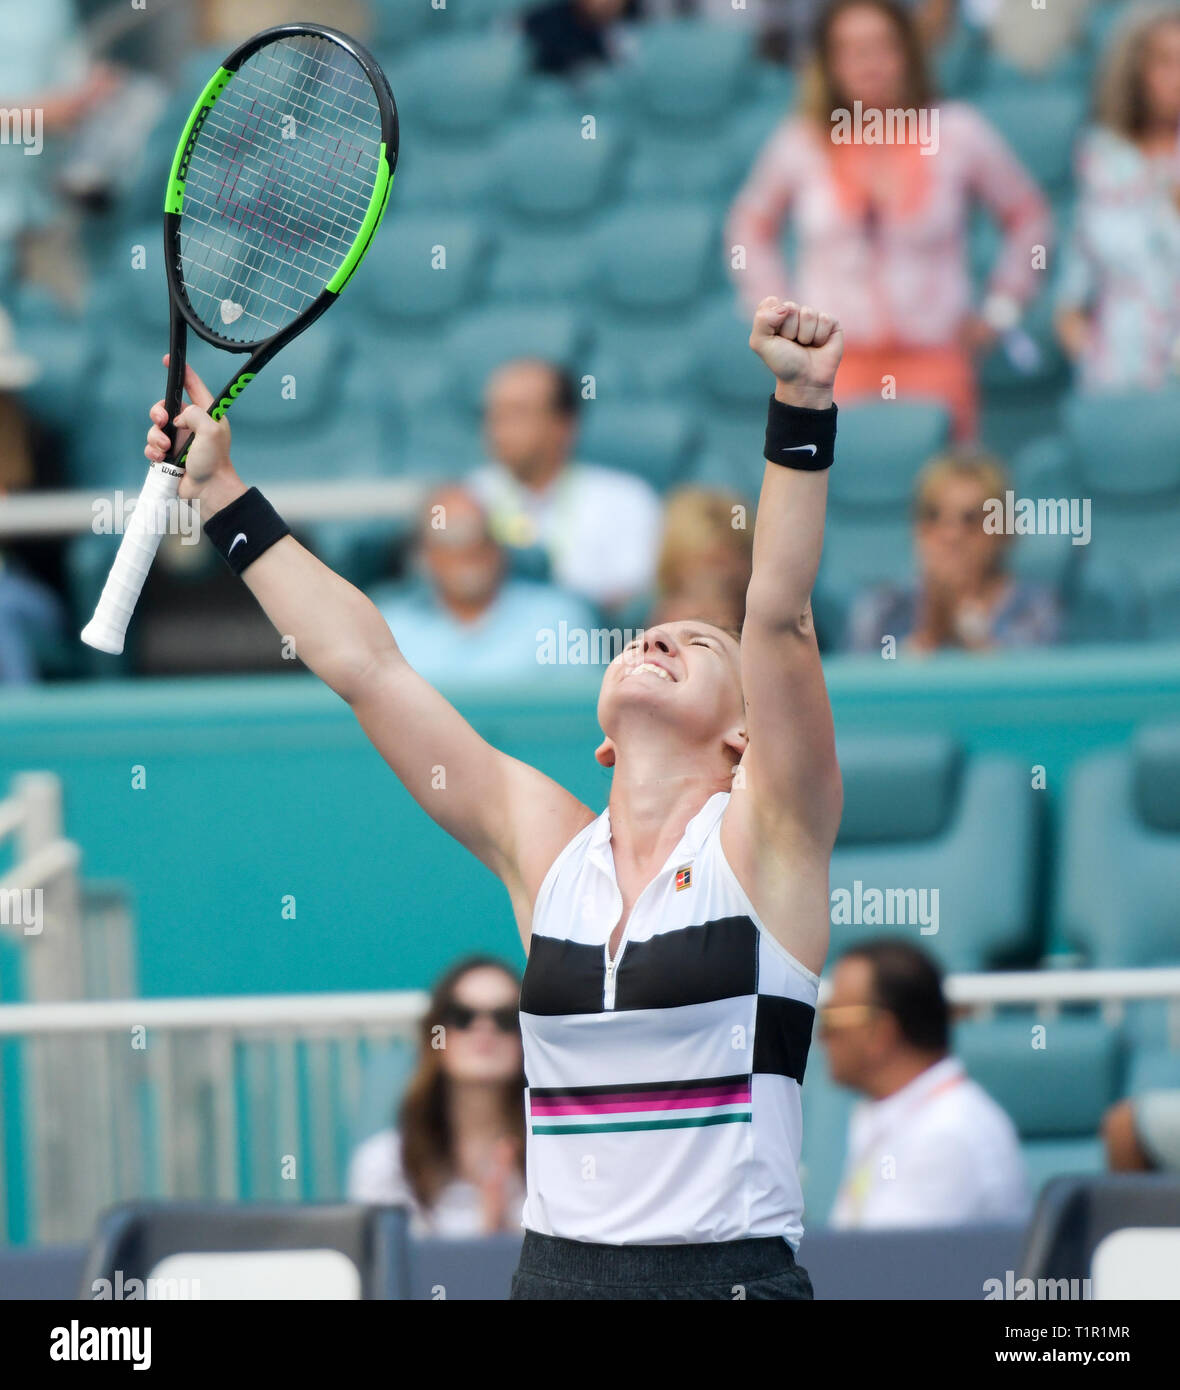 Miami, Florida, USA. 27th Mar, 2019. Simona Halep (ROU) defeated Qiang Wang  (CHN) 6-4, 7-5, at the Miami Open being played at Hard Rock Stadium in Miami,  Florida. © Karla Kinne/Tennisclix 2010/CSM/Alamy